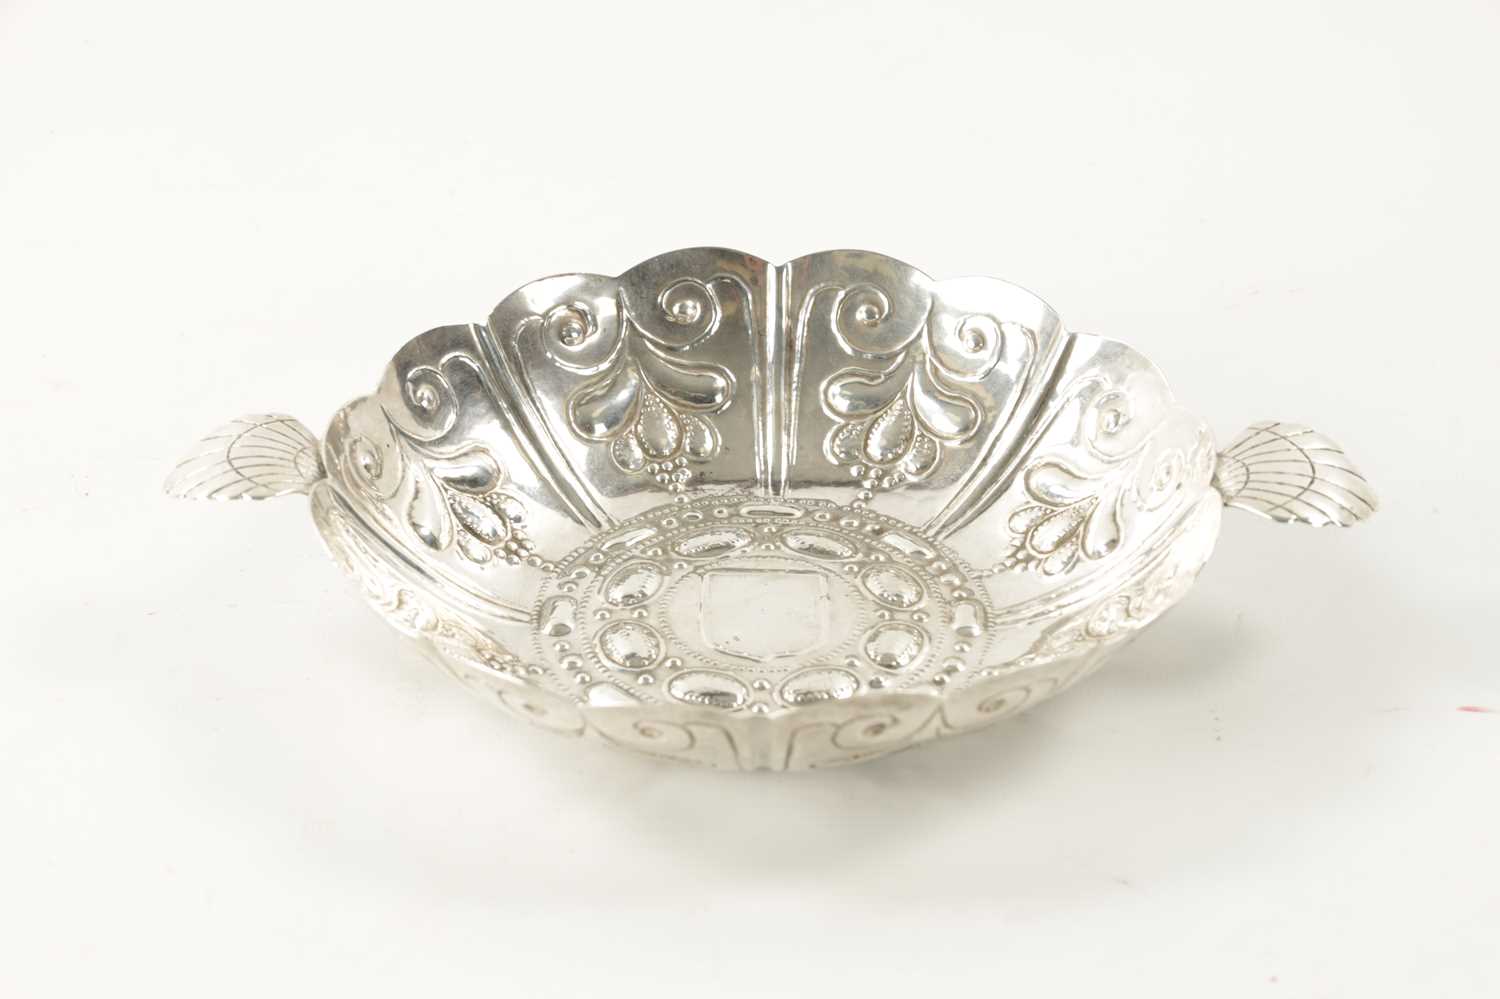 A FINE WILLIAM III SILVER SWEETMEAT DISH - Image 2 of 5